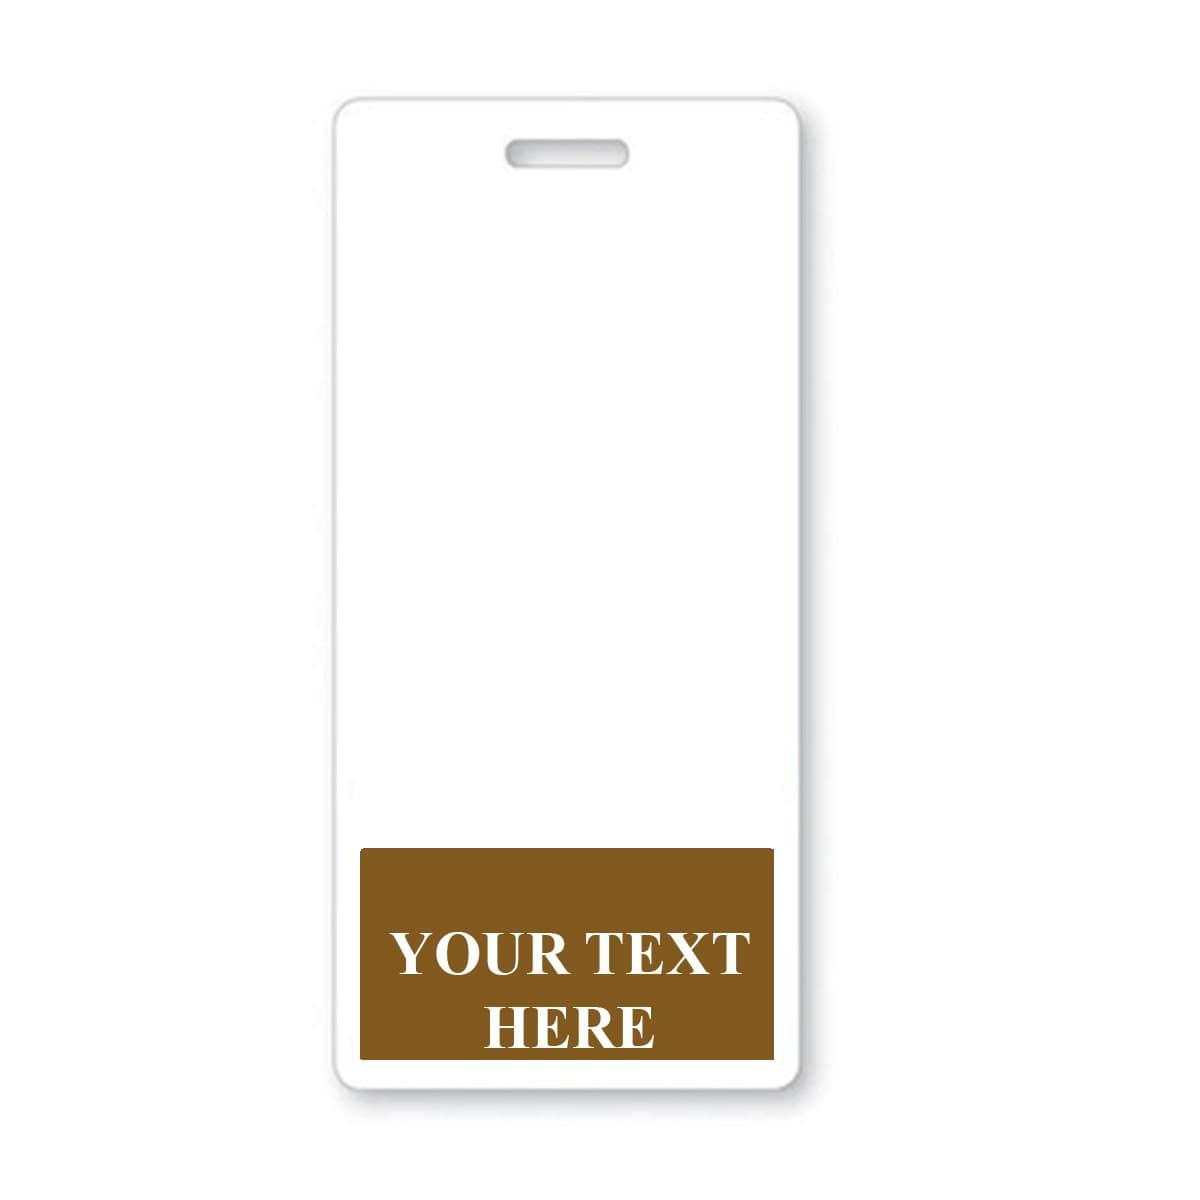 A Custom Printed Badge Buddy Vertical (Standard Size) with a rectangular brown section at the bottom containing the text "YOUR TEXT HERE" in white capital letters, perfect for custom badge buddies and instant role recognition.